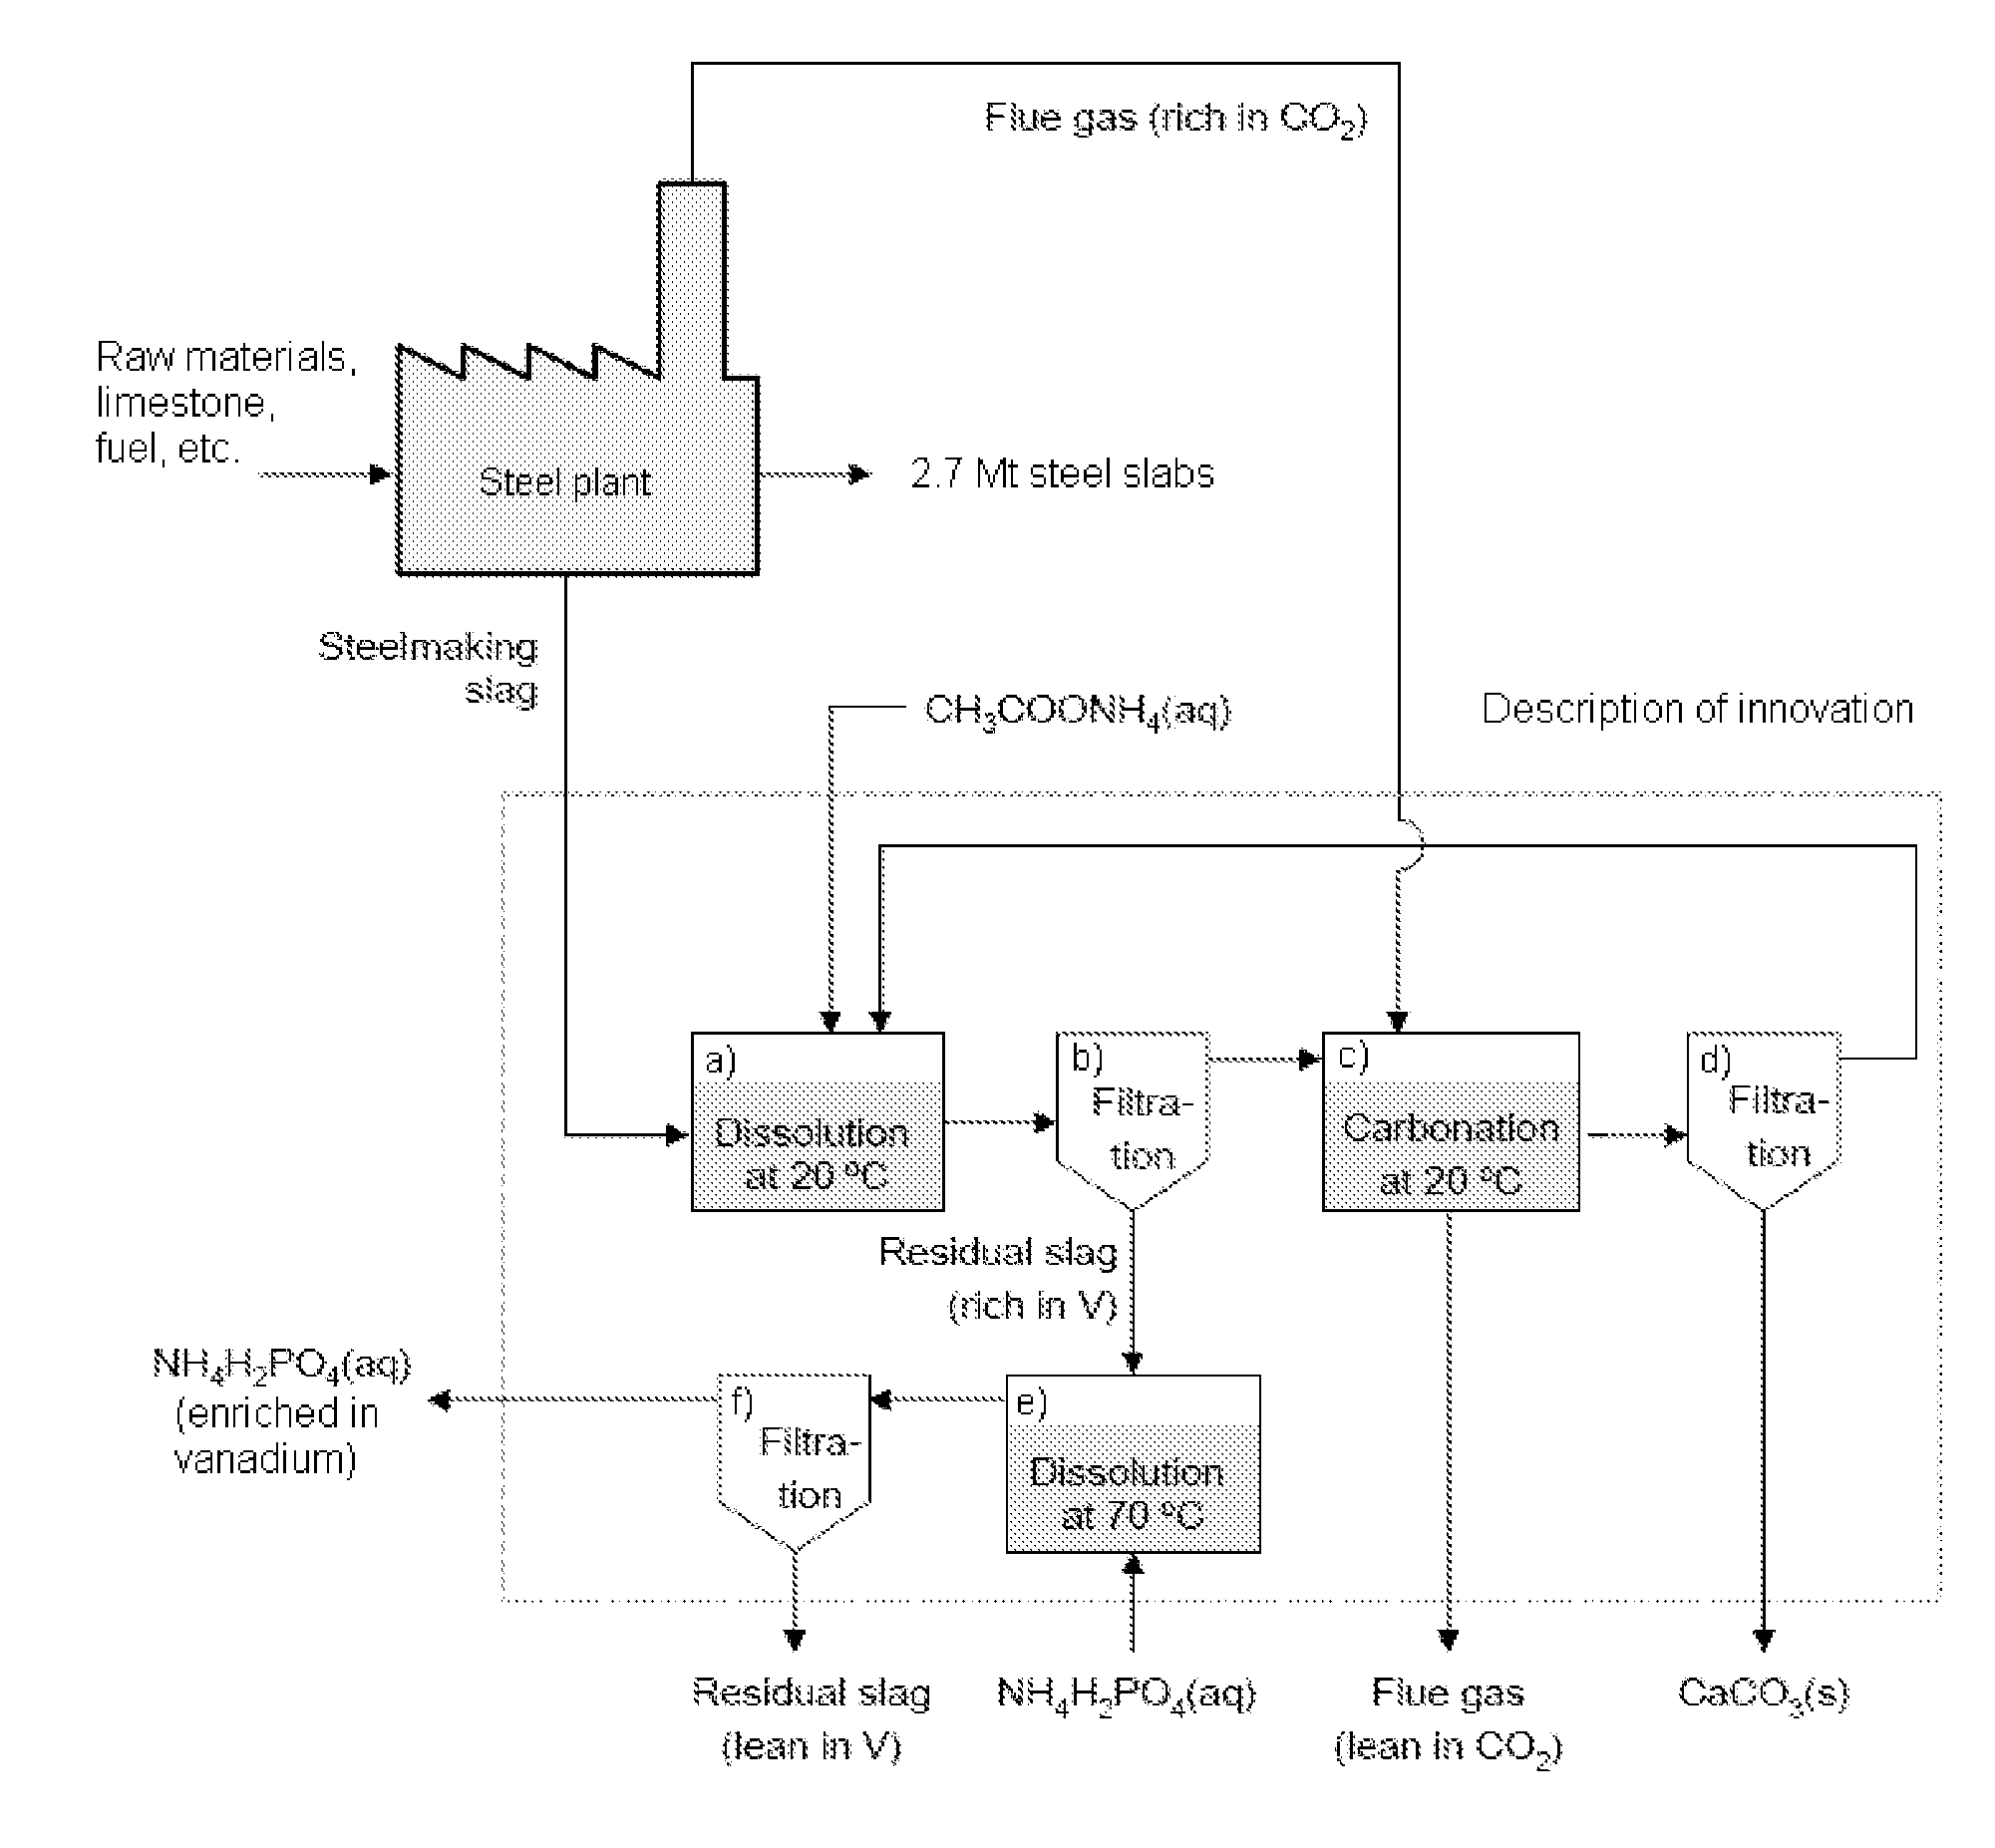 Method of producing calcium carbonate from waste and byproducts